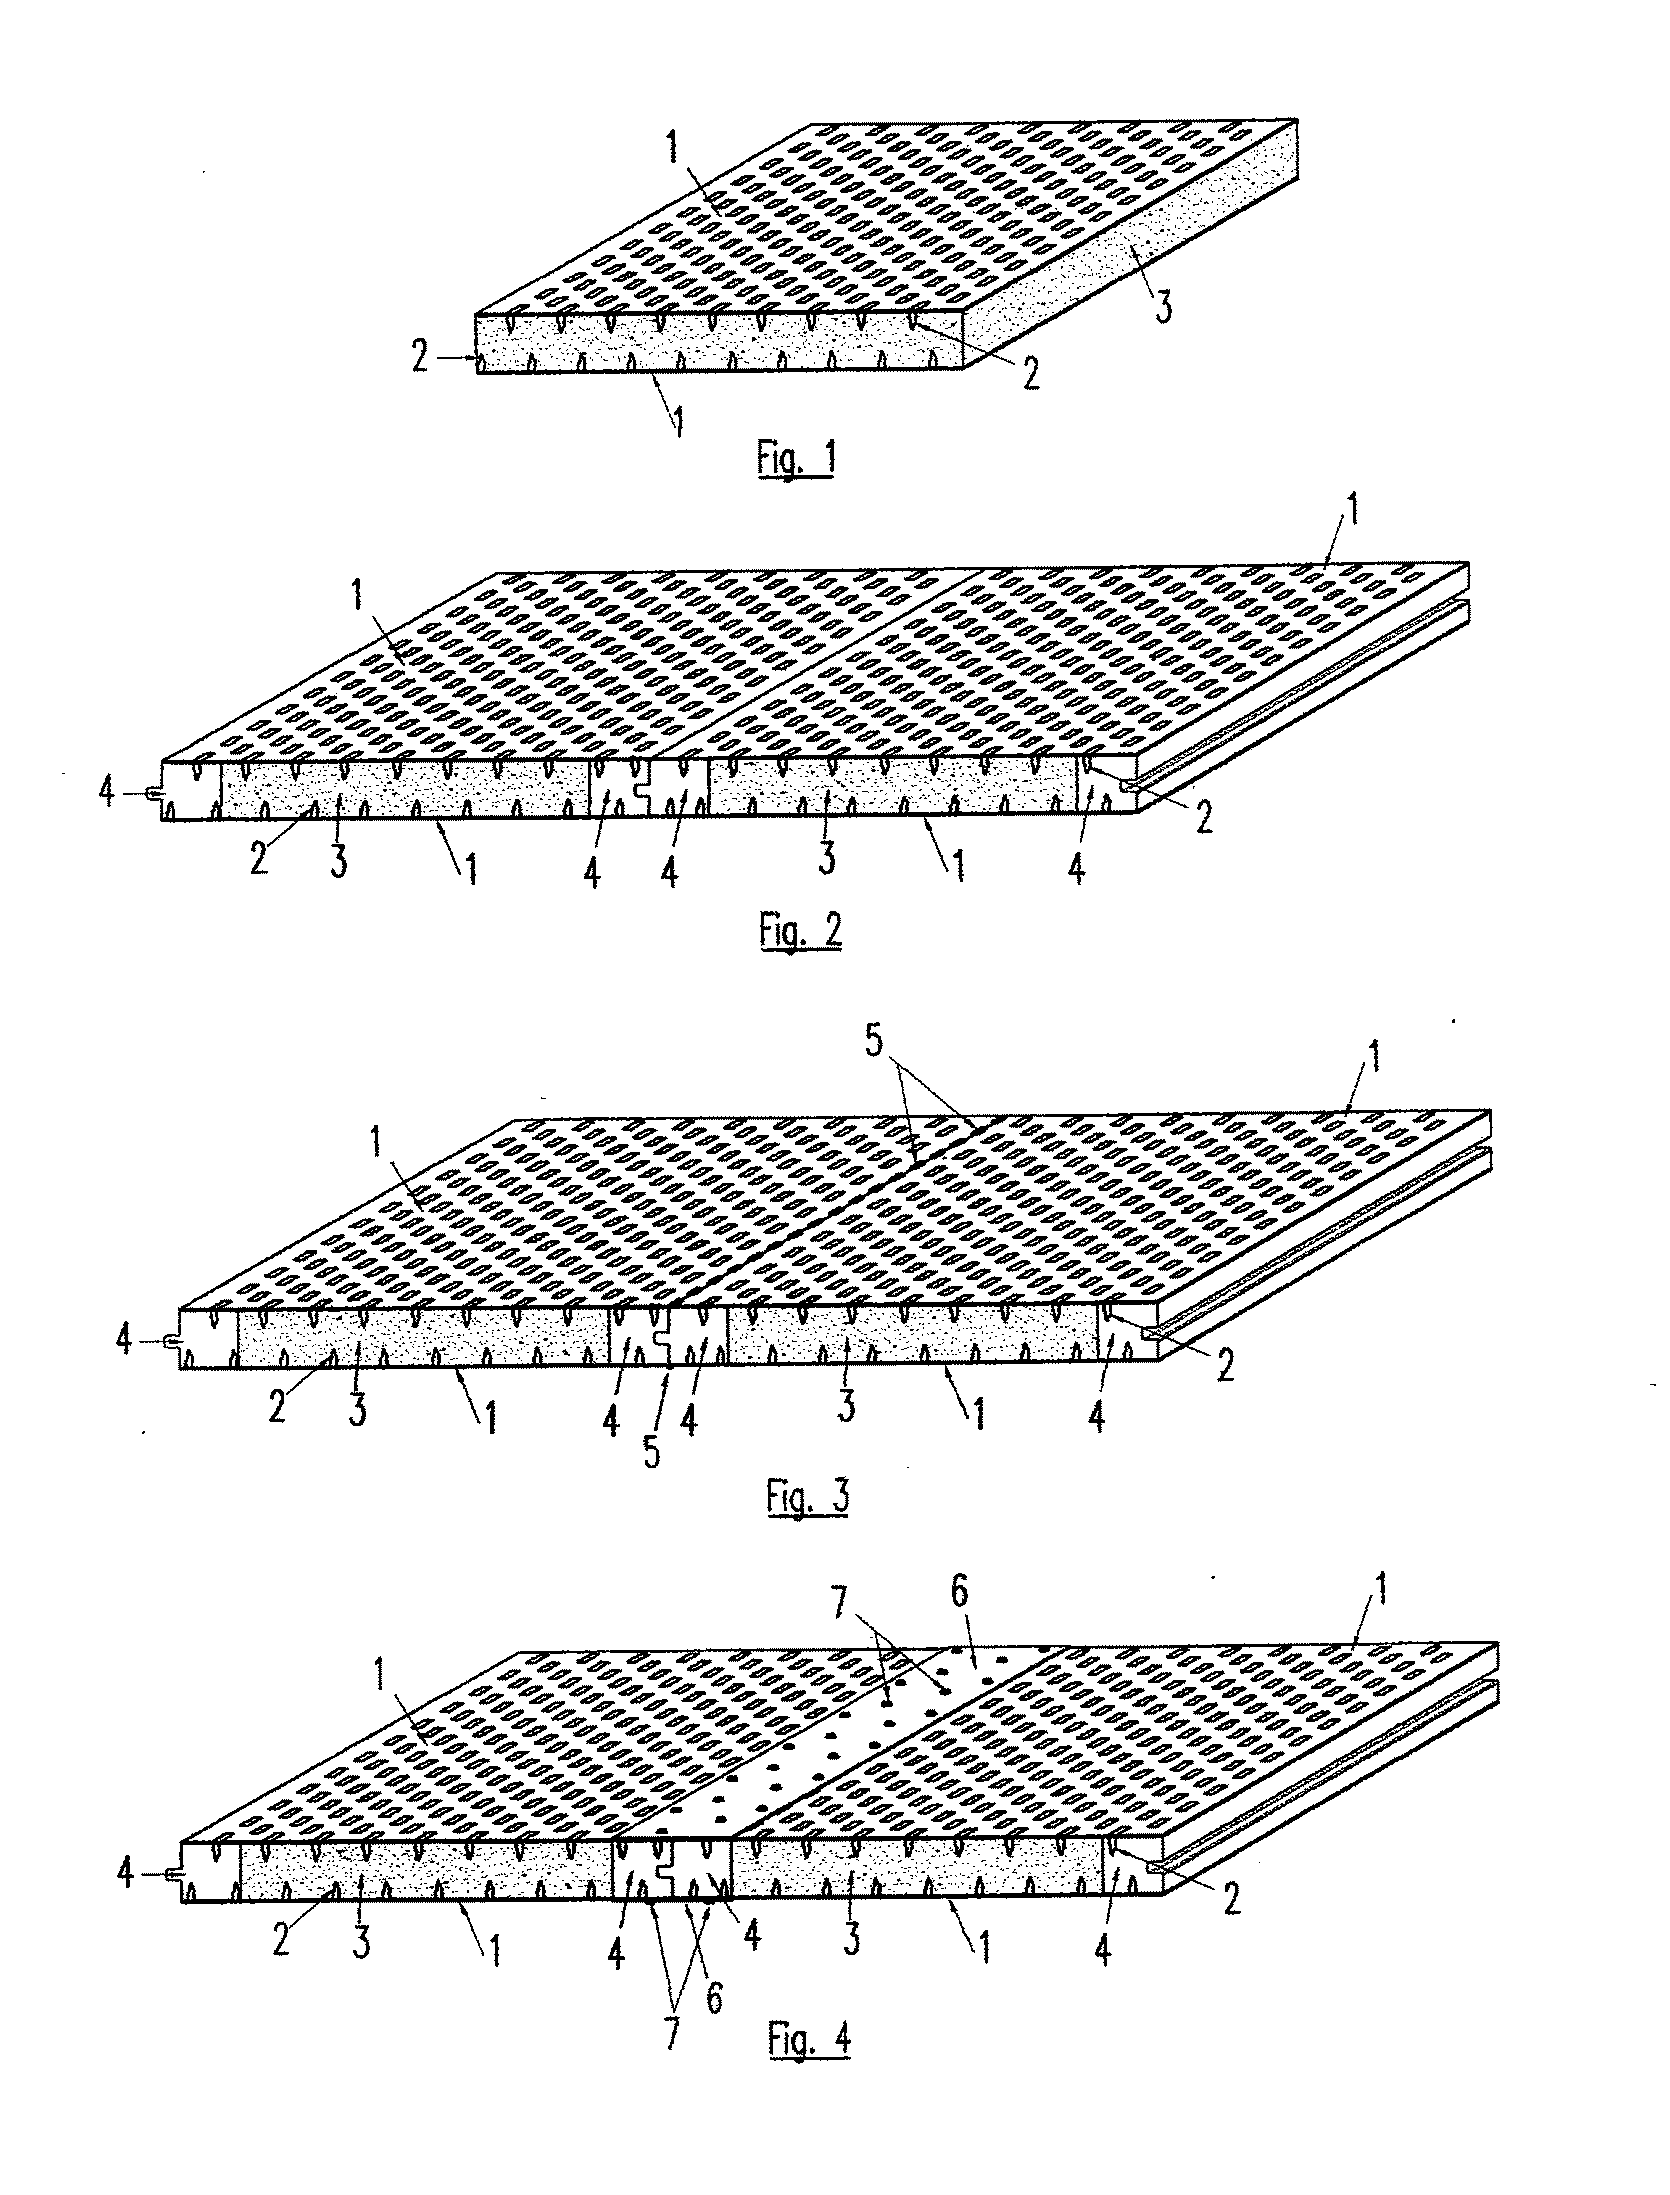 Nail-plated composite structural system